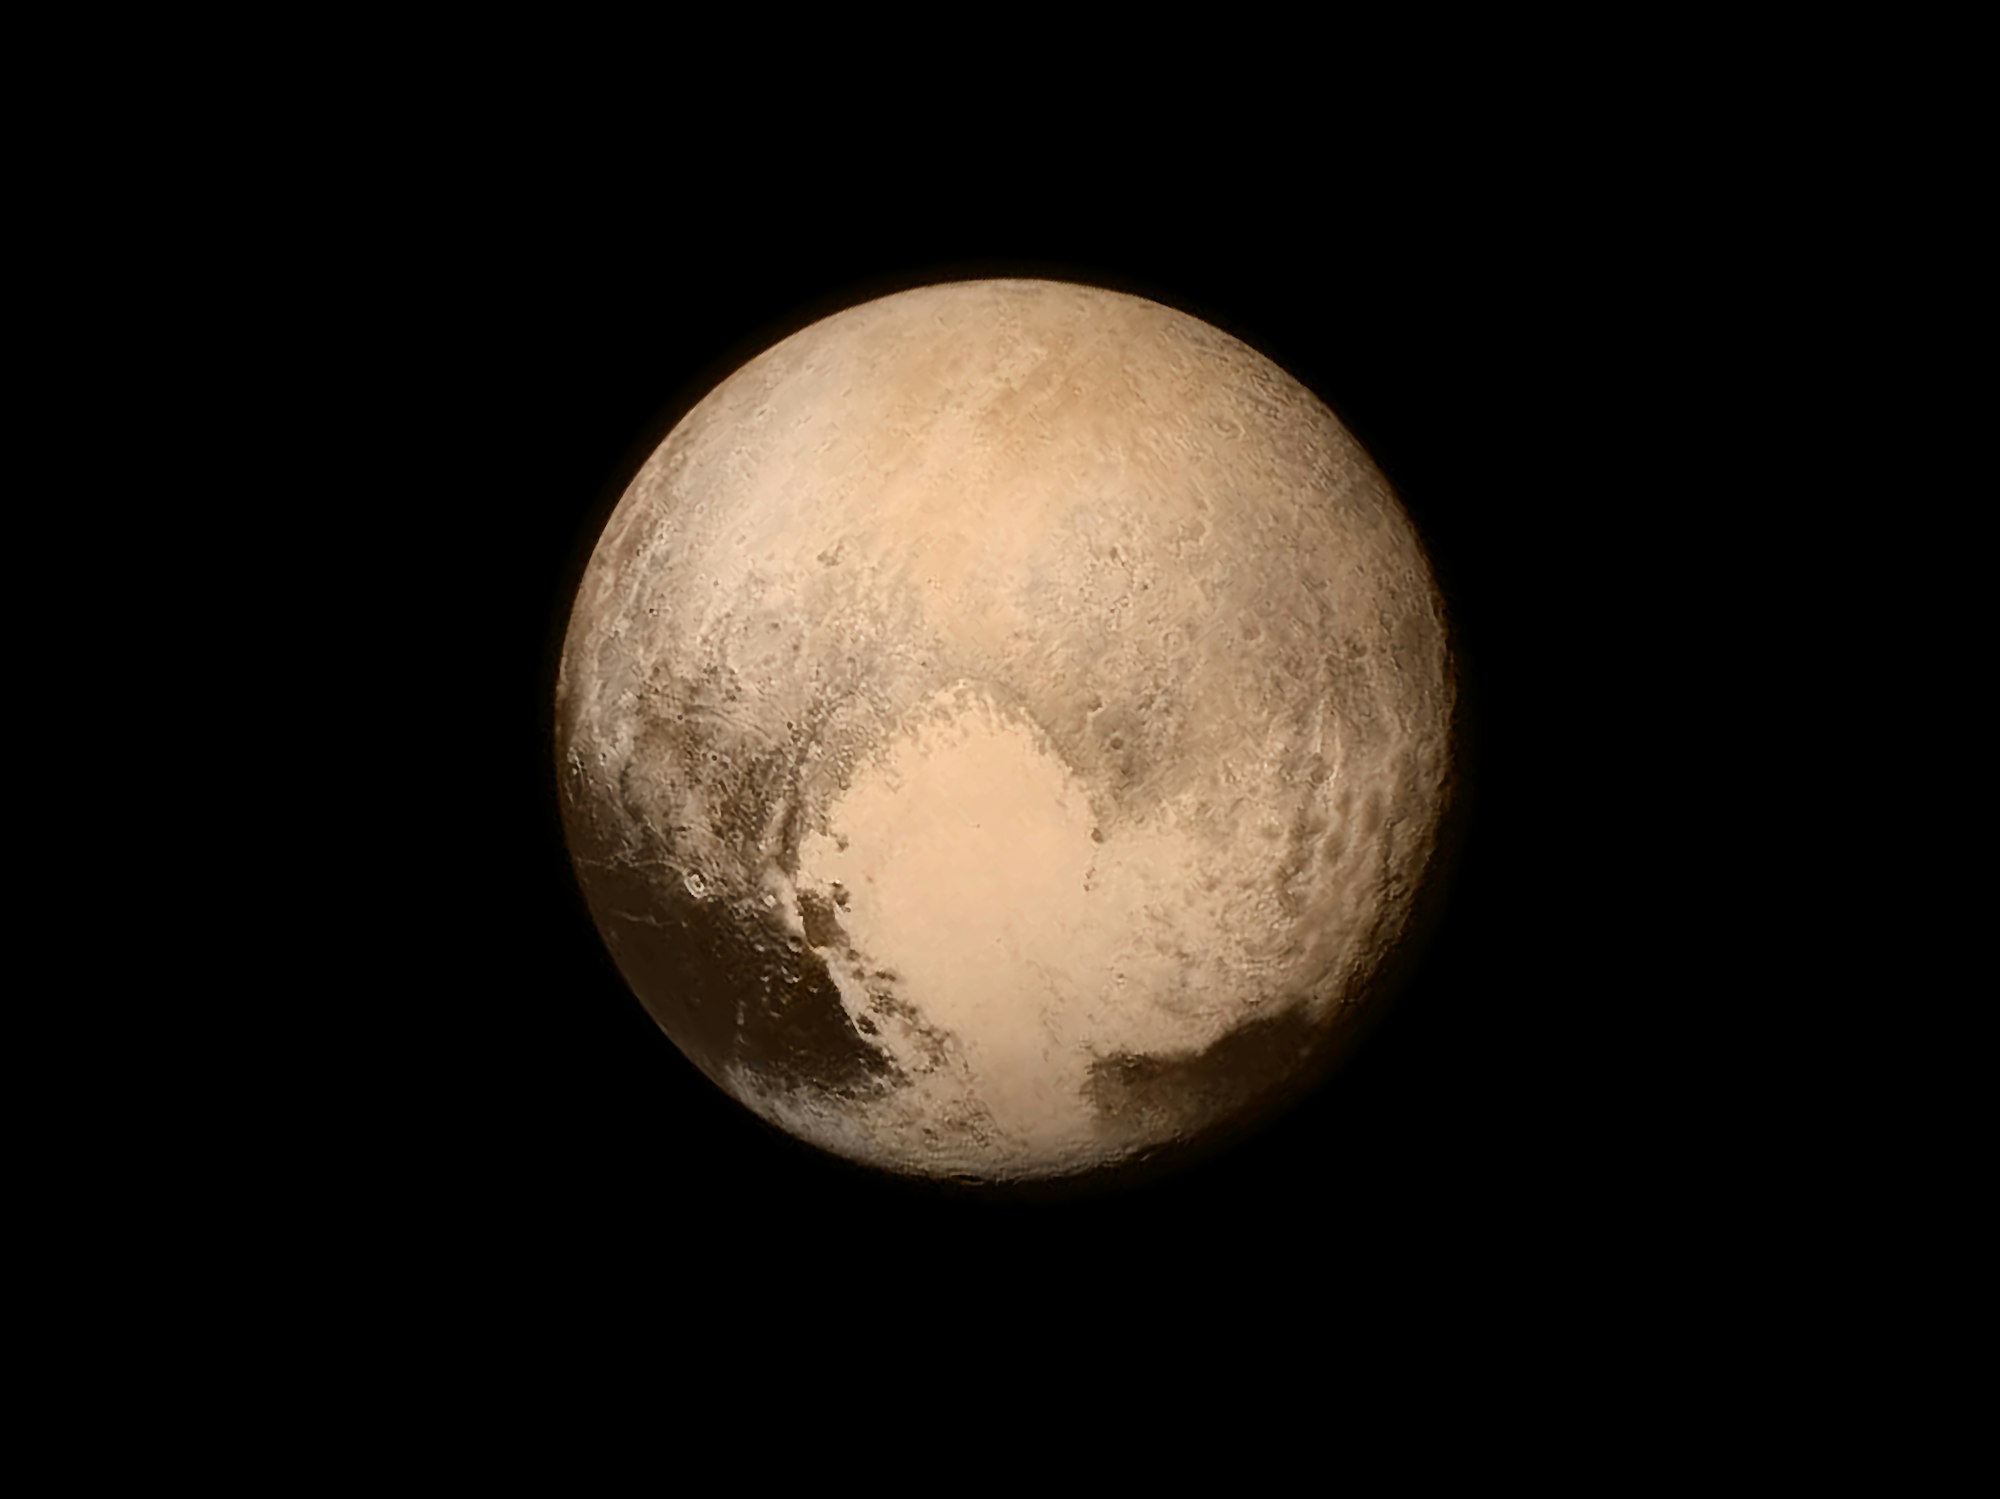 Pluto as seen from the New Horizons spacecraft in 2015 at a distance of 476,000 miles